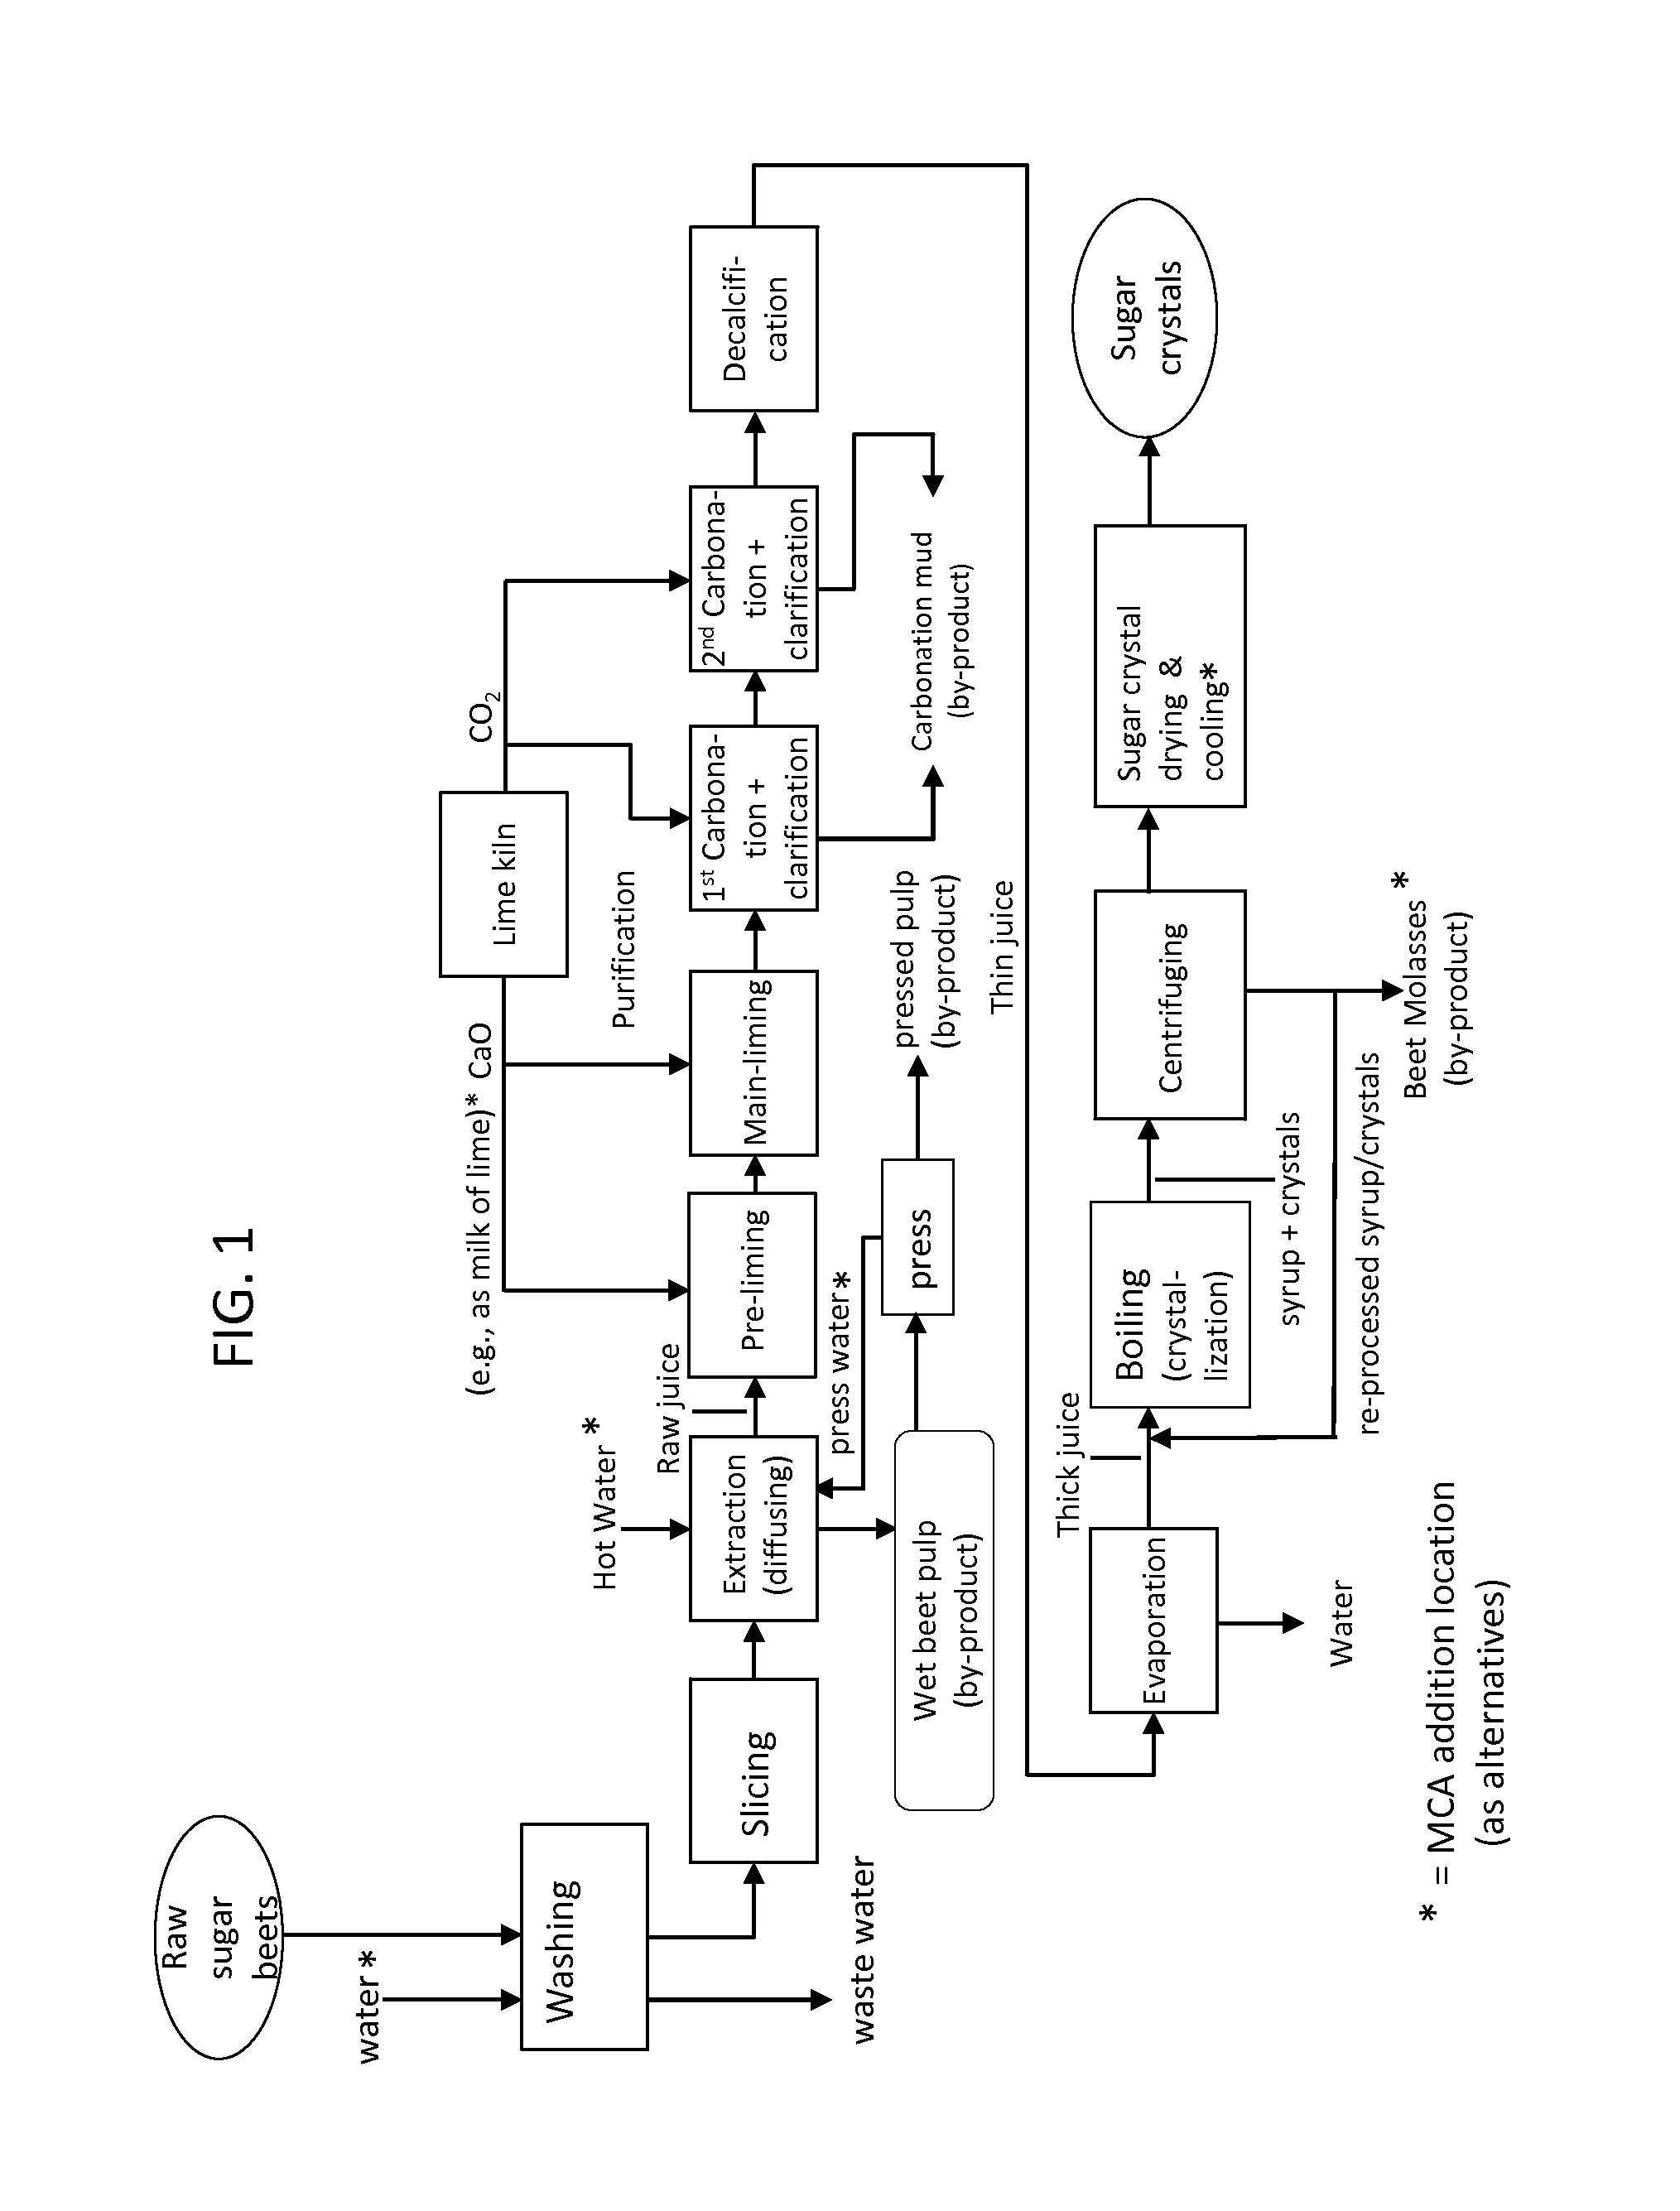 Methods Of Microbiological Control In Beet Sugar And Other Sugar-Containing Plant Material Processing